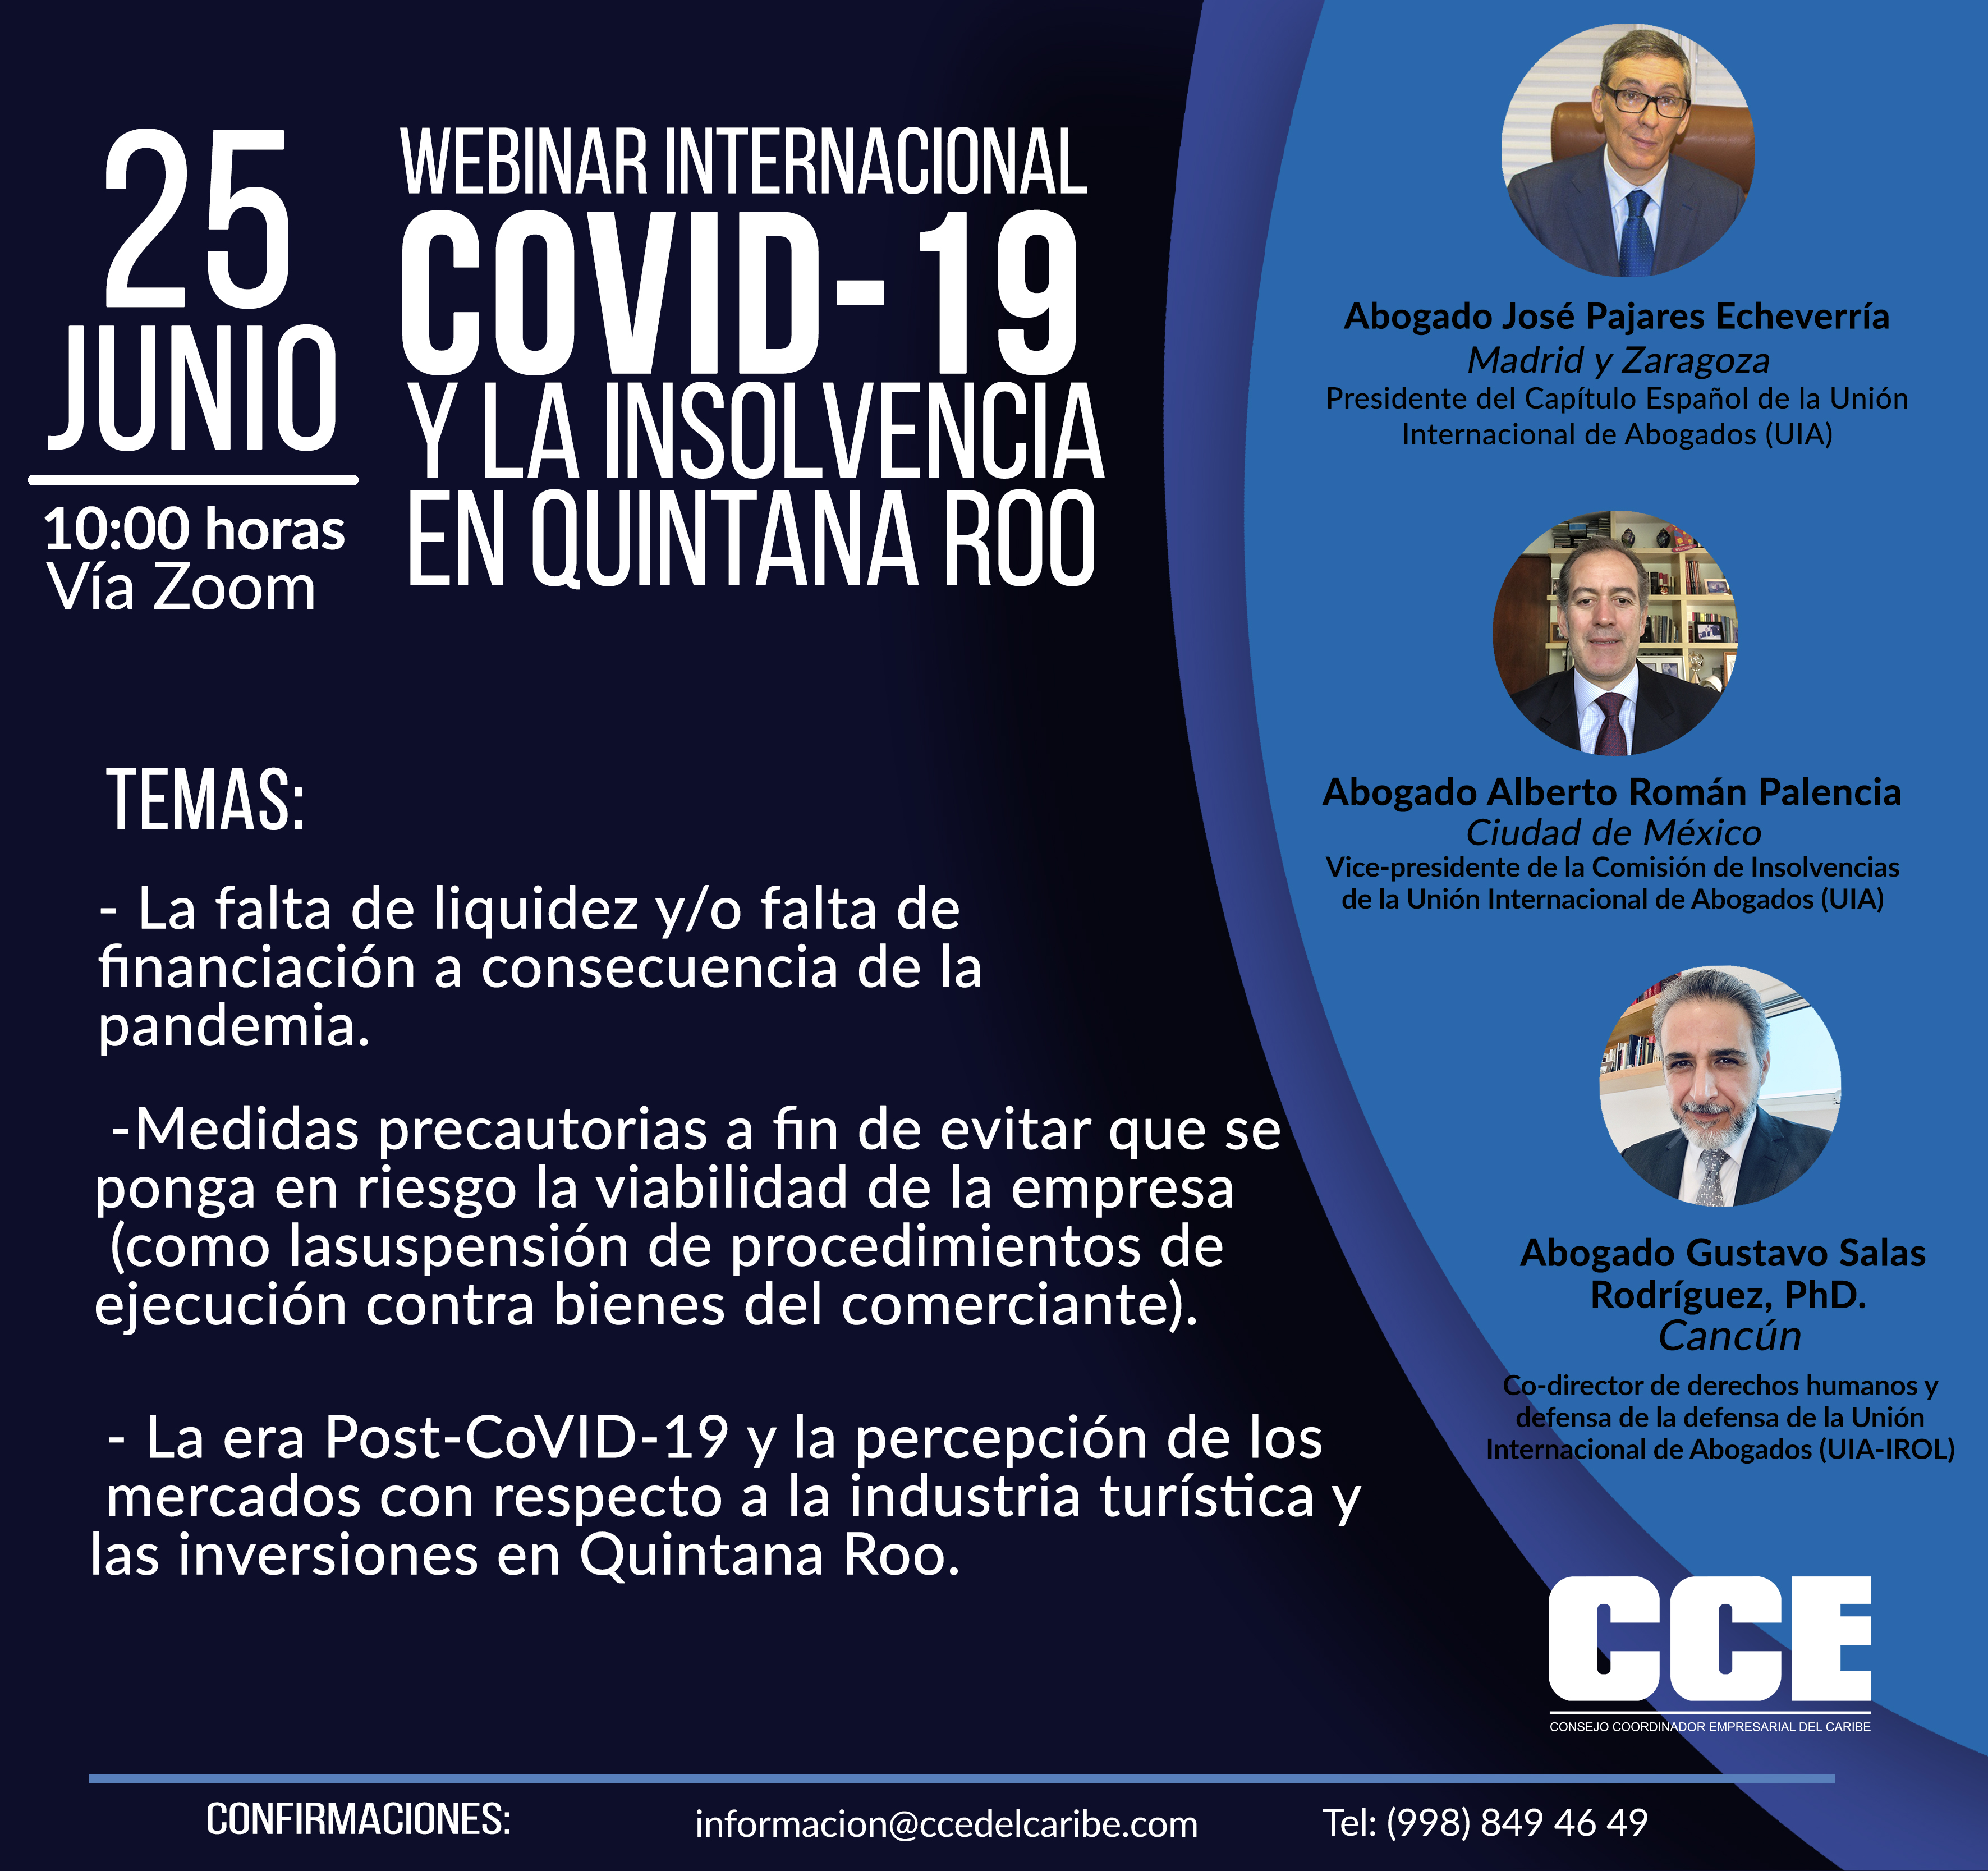  Mr. José Pajares participates in the Webinar: International Covid-19 and Insolvency in Quintana Roo